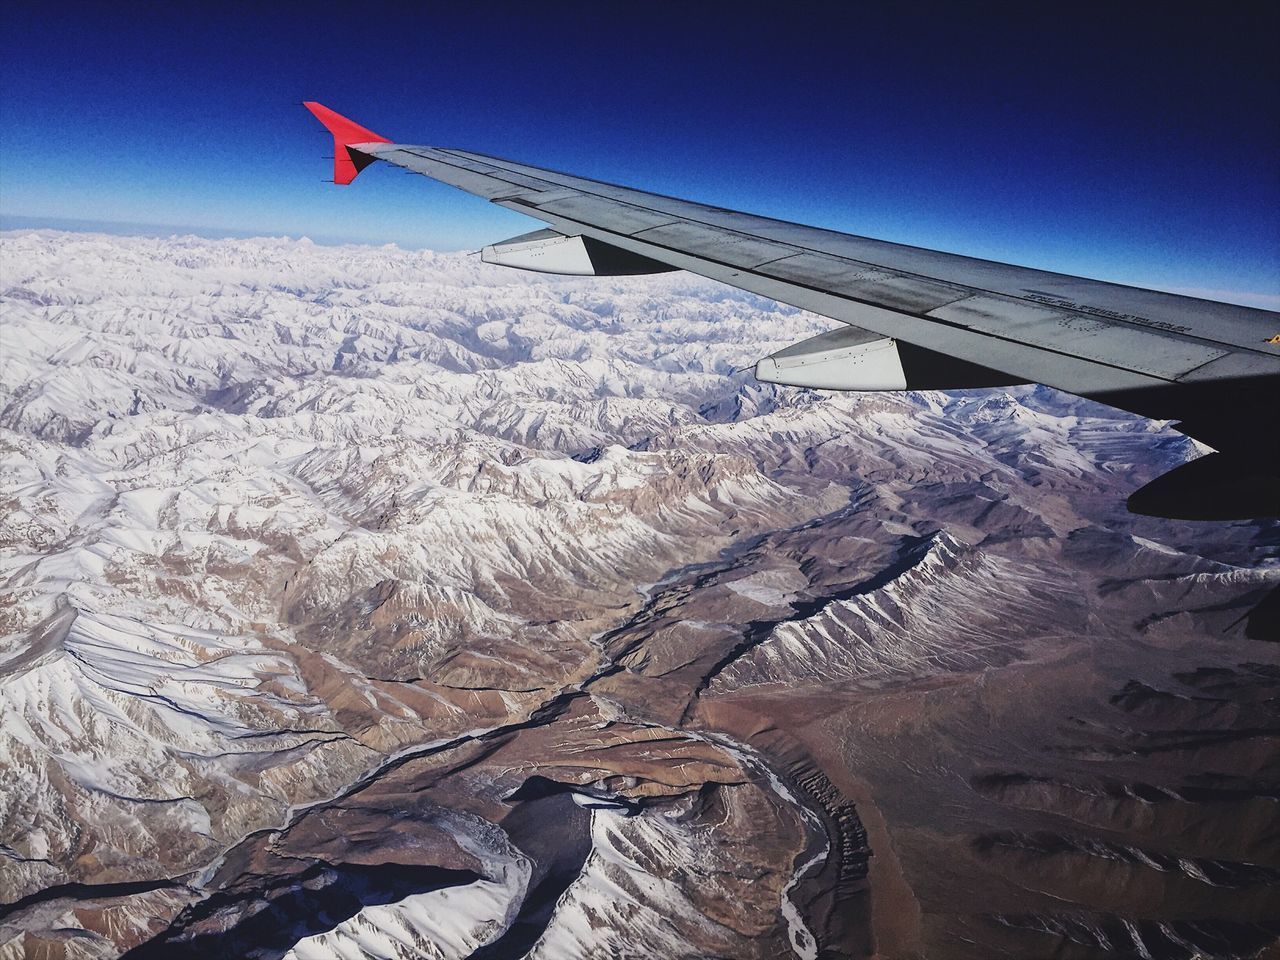 air vehicle, airplane, aircraft wing, transportation, flying, no people, sky, travel, mode of transportation, mountain, scenics - nature, beauty in nature, landscape, nature, environment, day, mid-air, physical geography, aerial view, tranquil scene, snowcapped mountain, formation